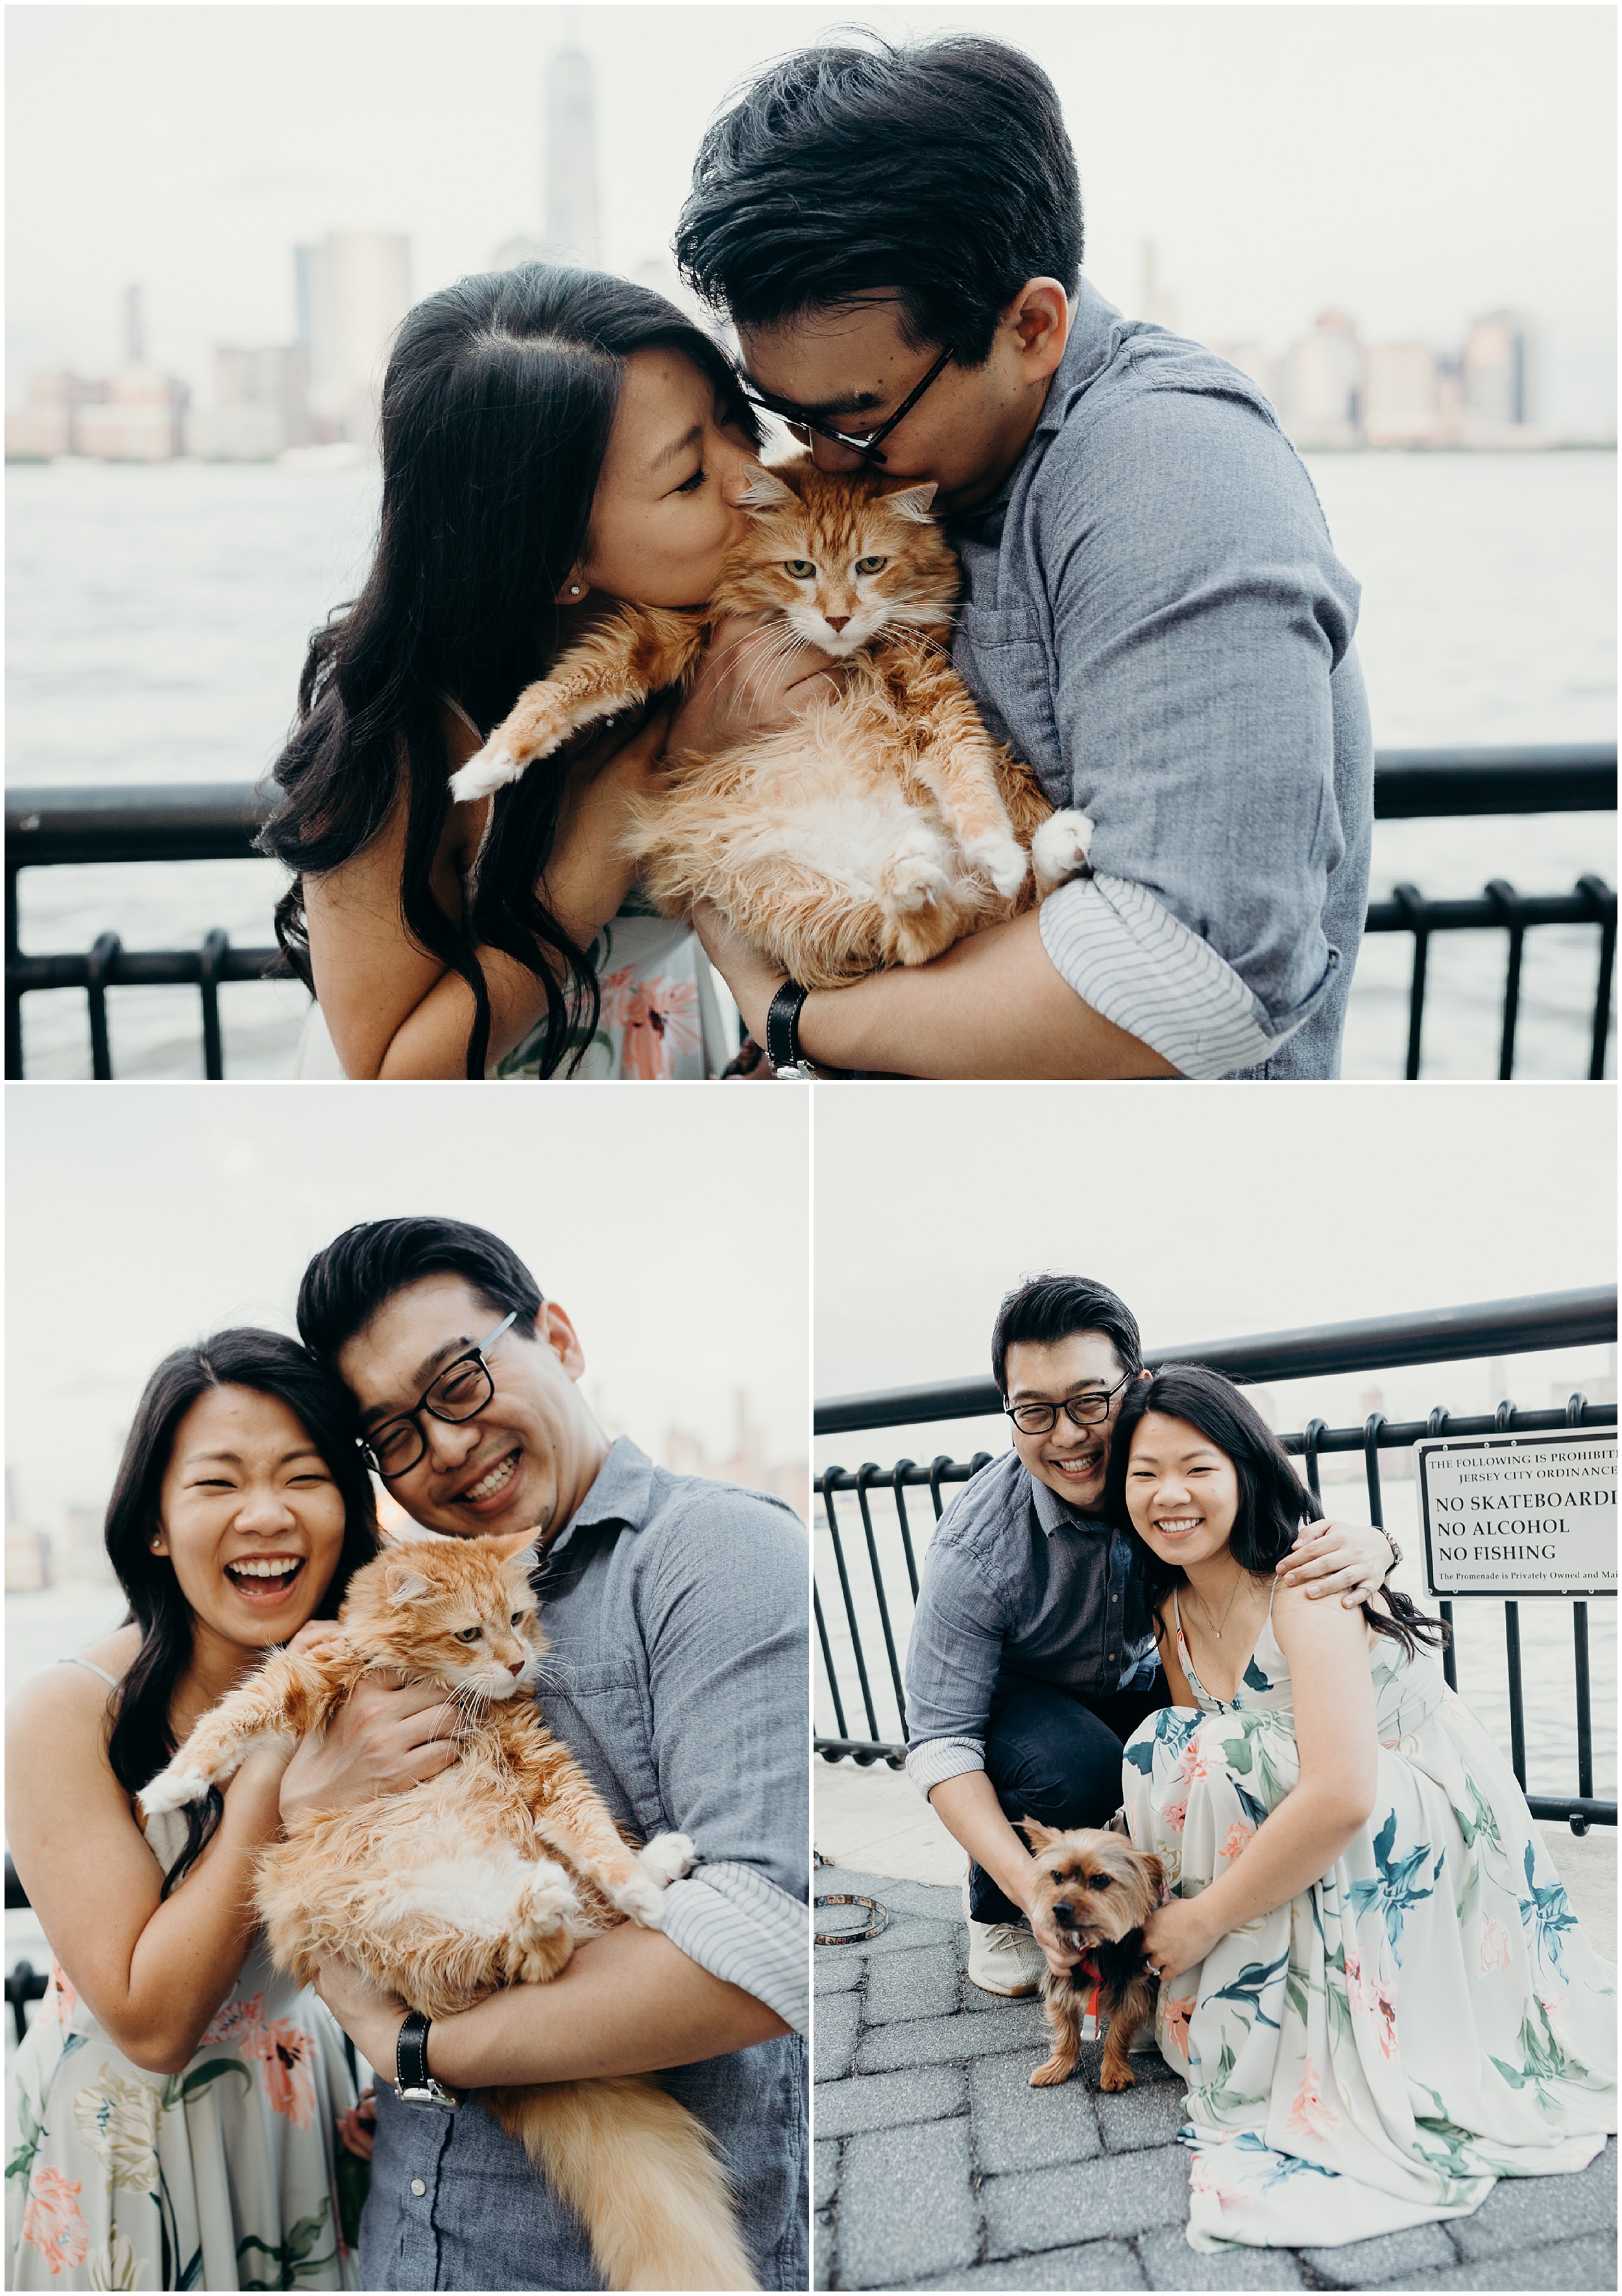 a portrait of a couple with their cat and dog at liberty state park in jersey city, new jersey